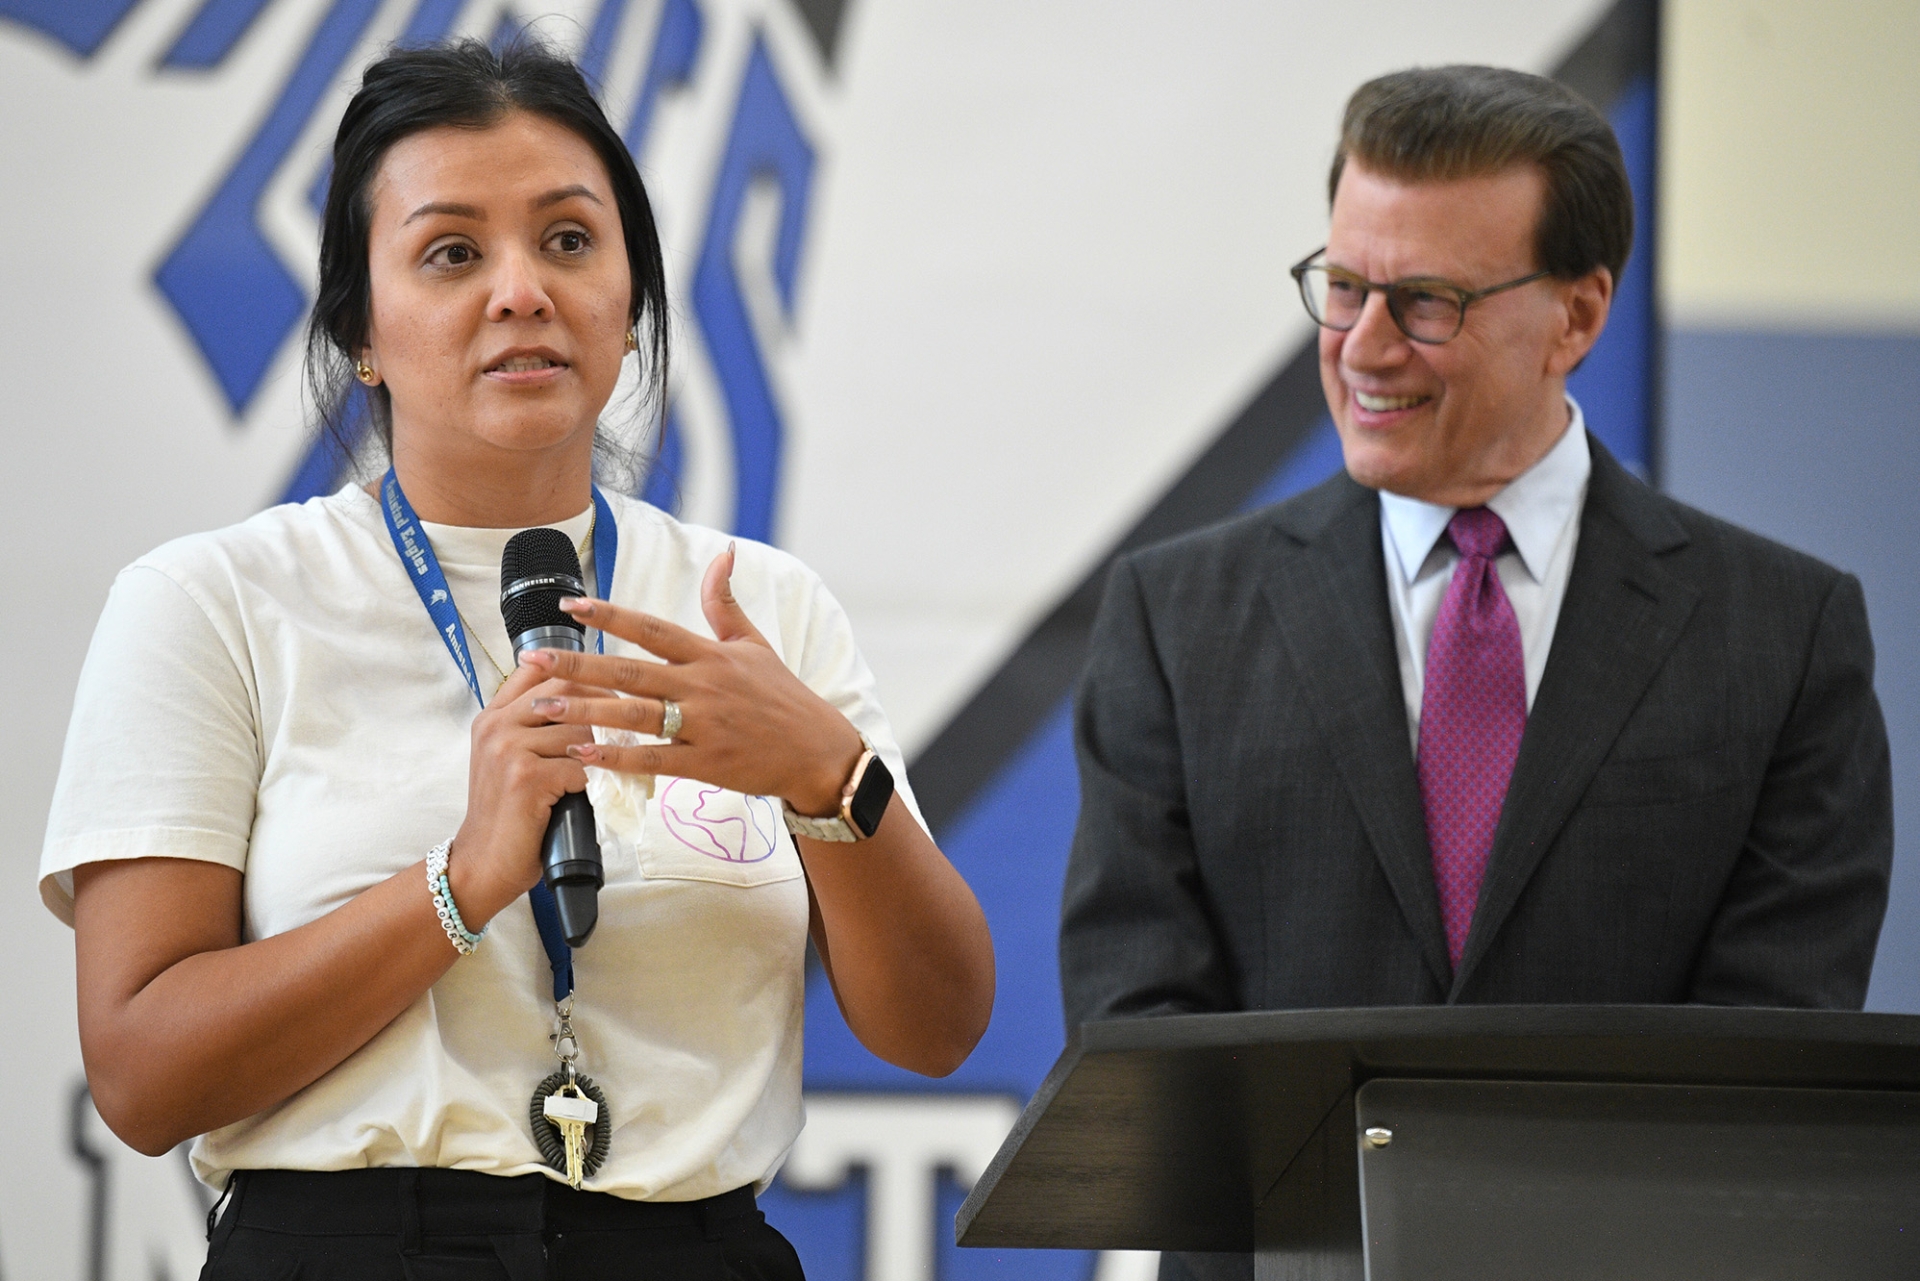 With Milken Educator Awards Founder Lowell Milken (at right) looking on, recipient Alexis Arias thanks the students, colleagues and visitors who just witnessed her surprise notification. Photo courtesy of Milken Family Foundation.